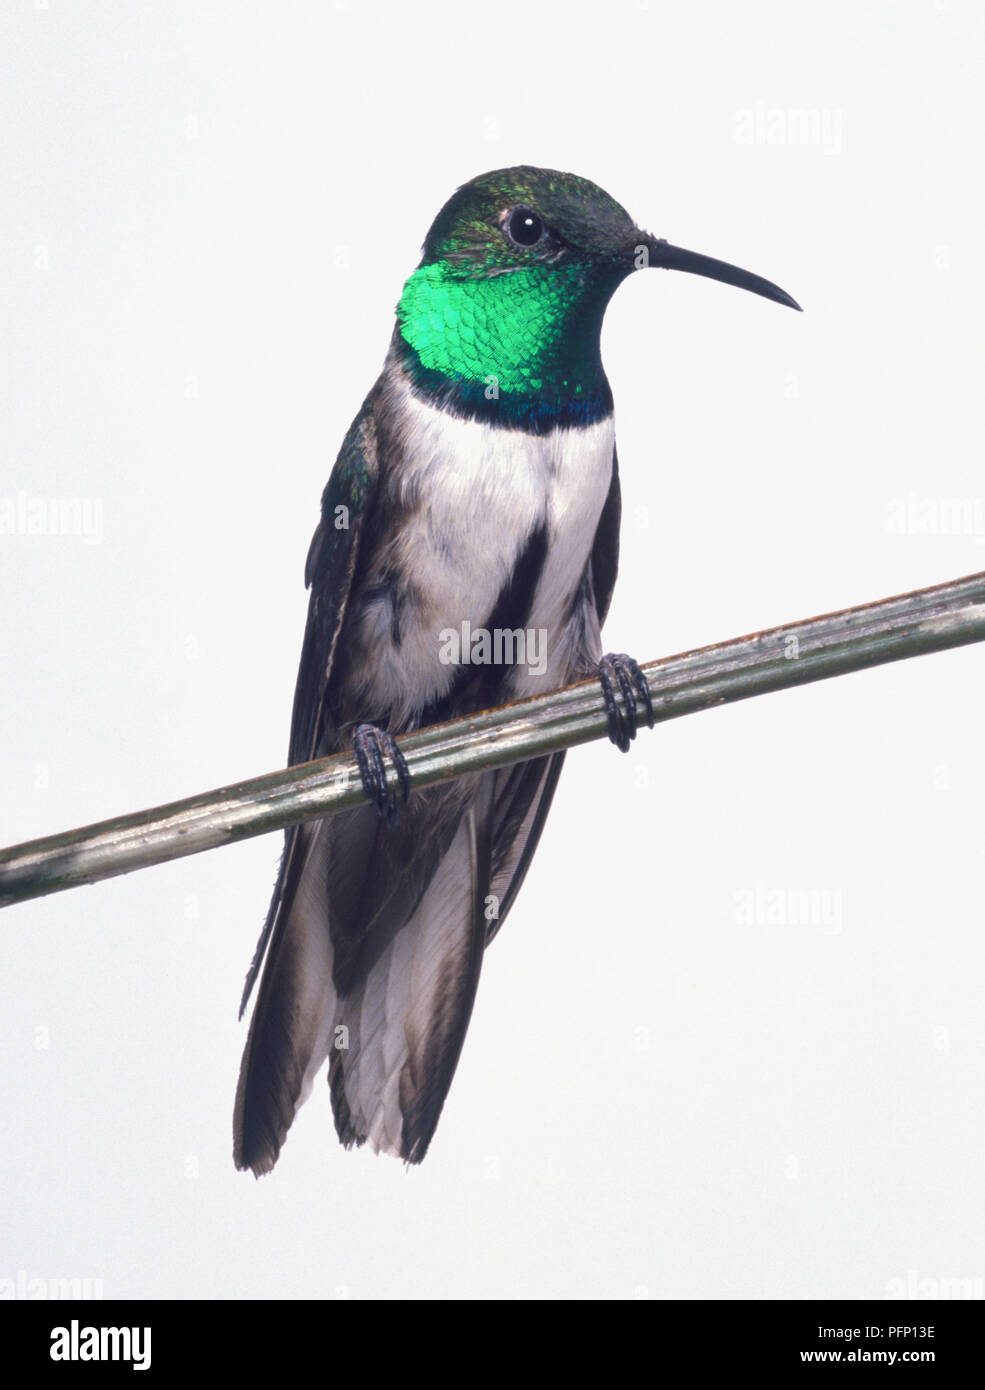 Front view of an Andean Hillstar with head in profile, perching on branch showing the slender, pointed bill, iridescent throat patch looking black or green depending on angle of view, long wings, spread tail feathers and dark belly. Stock Photo